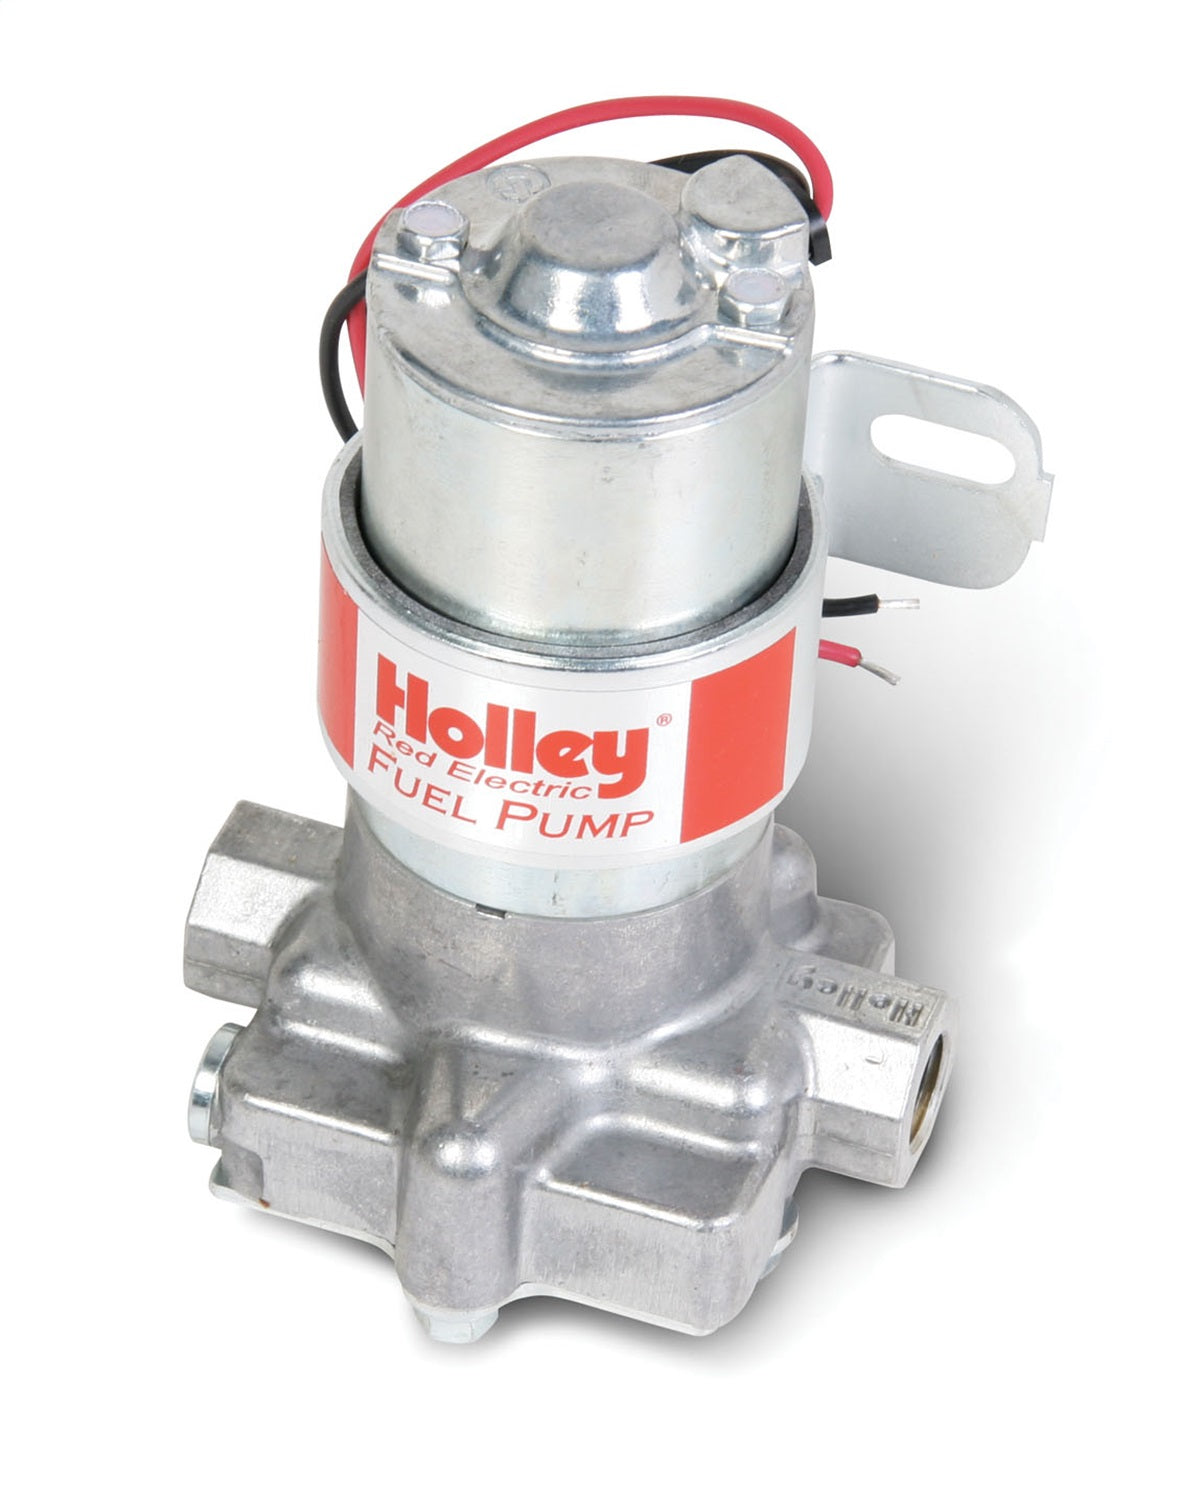 Holley Performance 12-801-1 Electric Fuel Pump